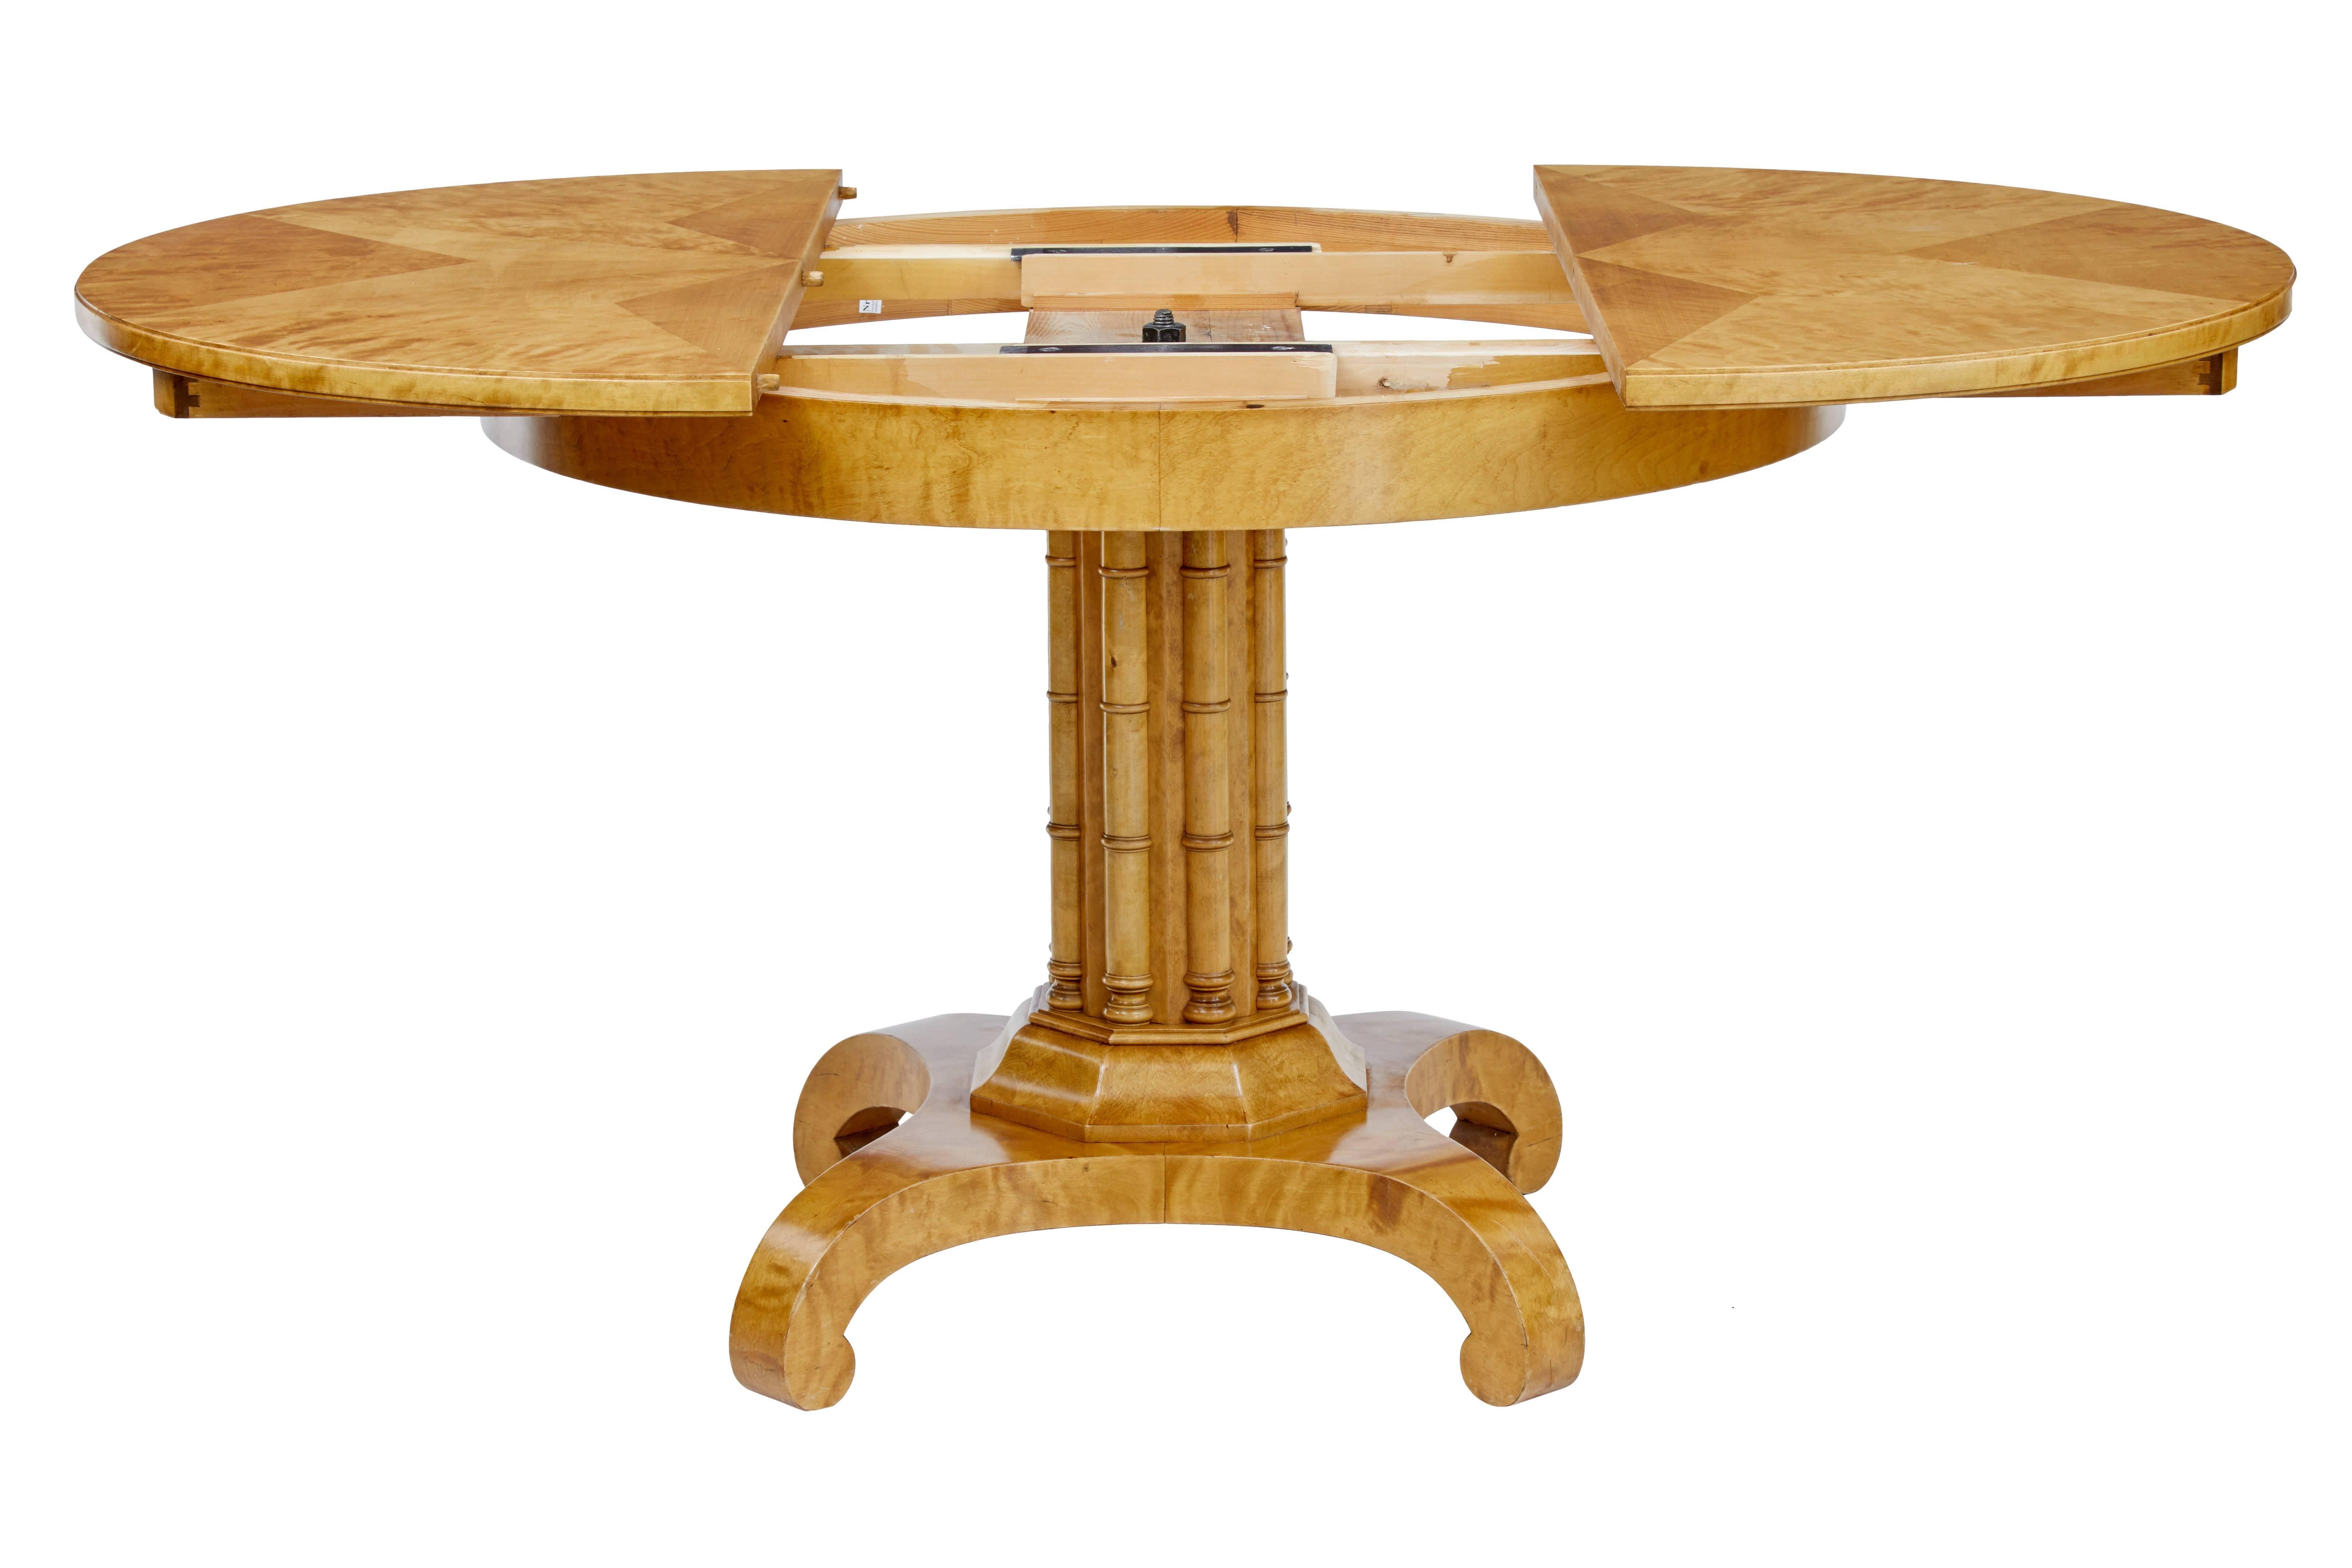 Fine quality birch table, circa 1920.
Circular top with inlaid star design on the top.
Octagonal stem base with applied turned faux bamboo columns.
Standing on a quadriform base and scrolled feet.

We are selling this as a centre table, but the